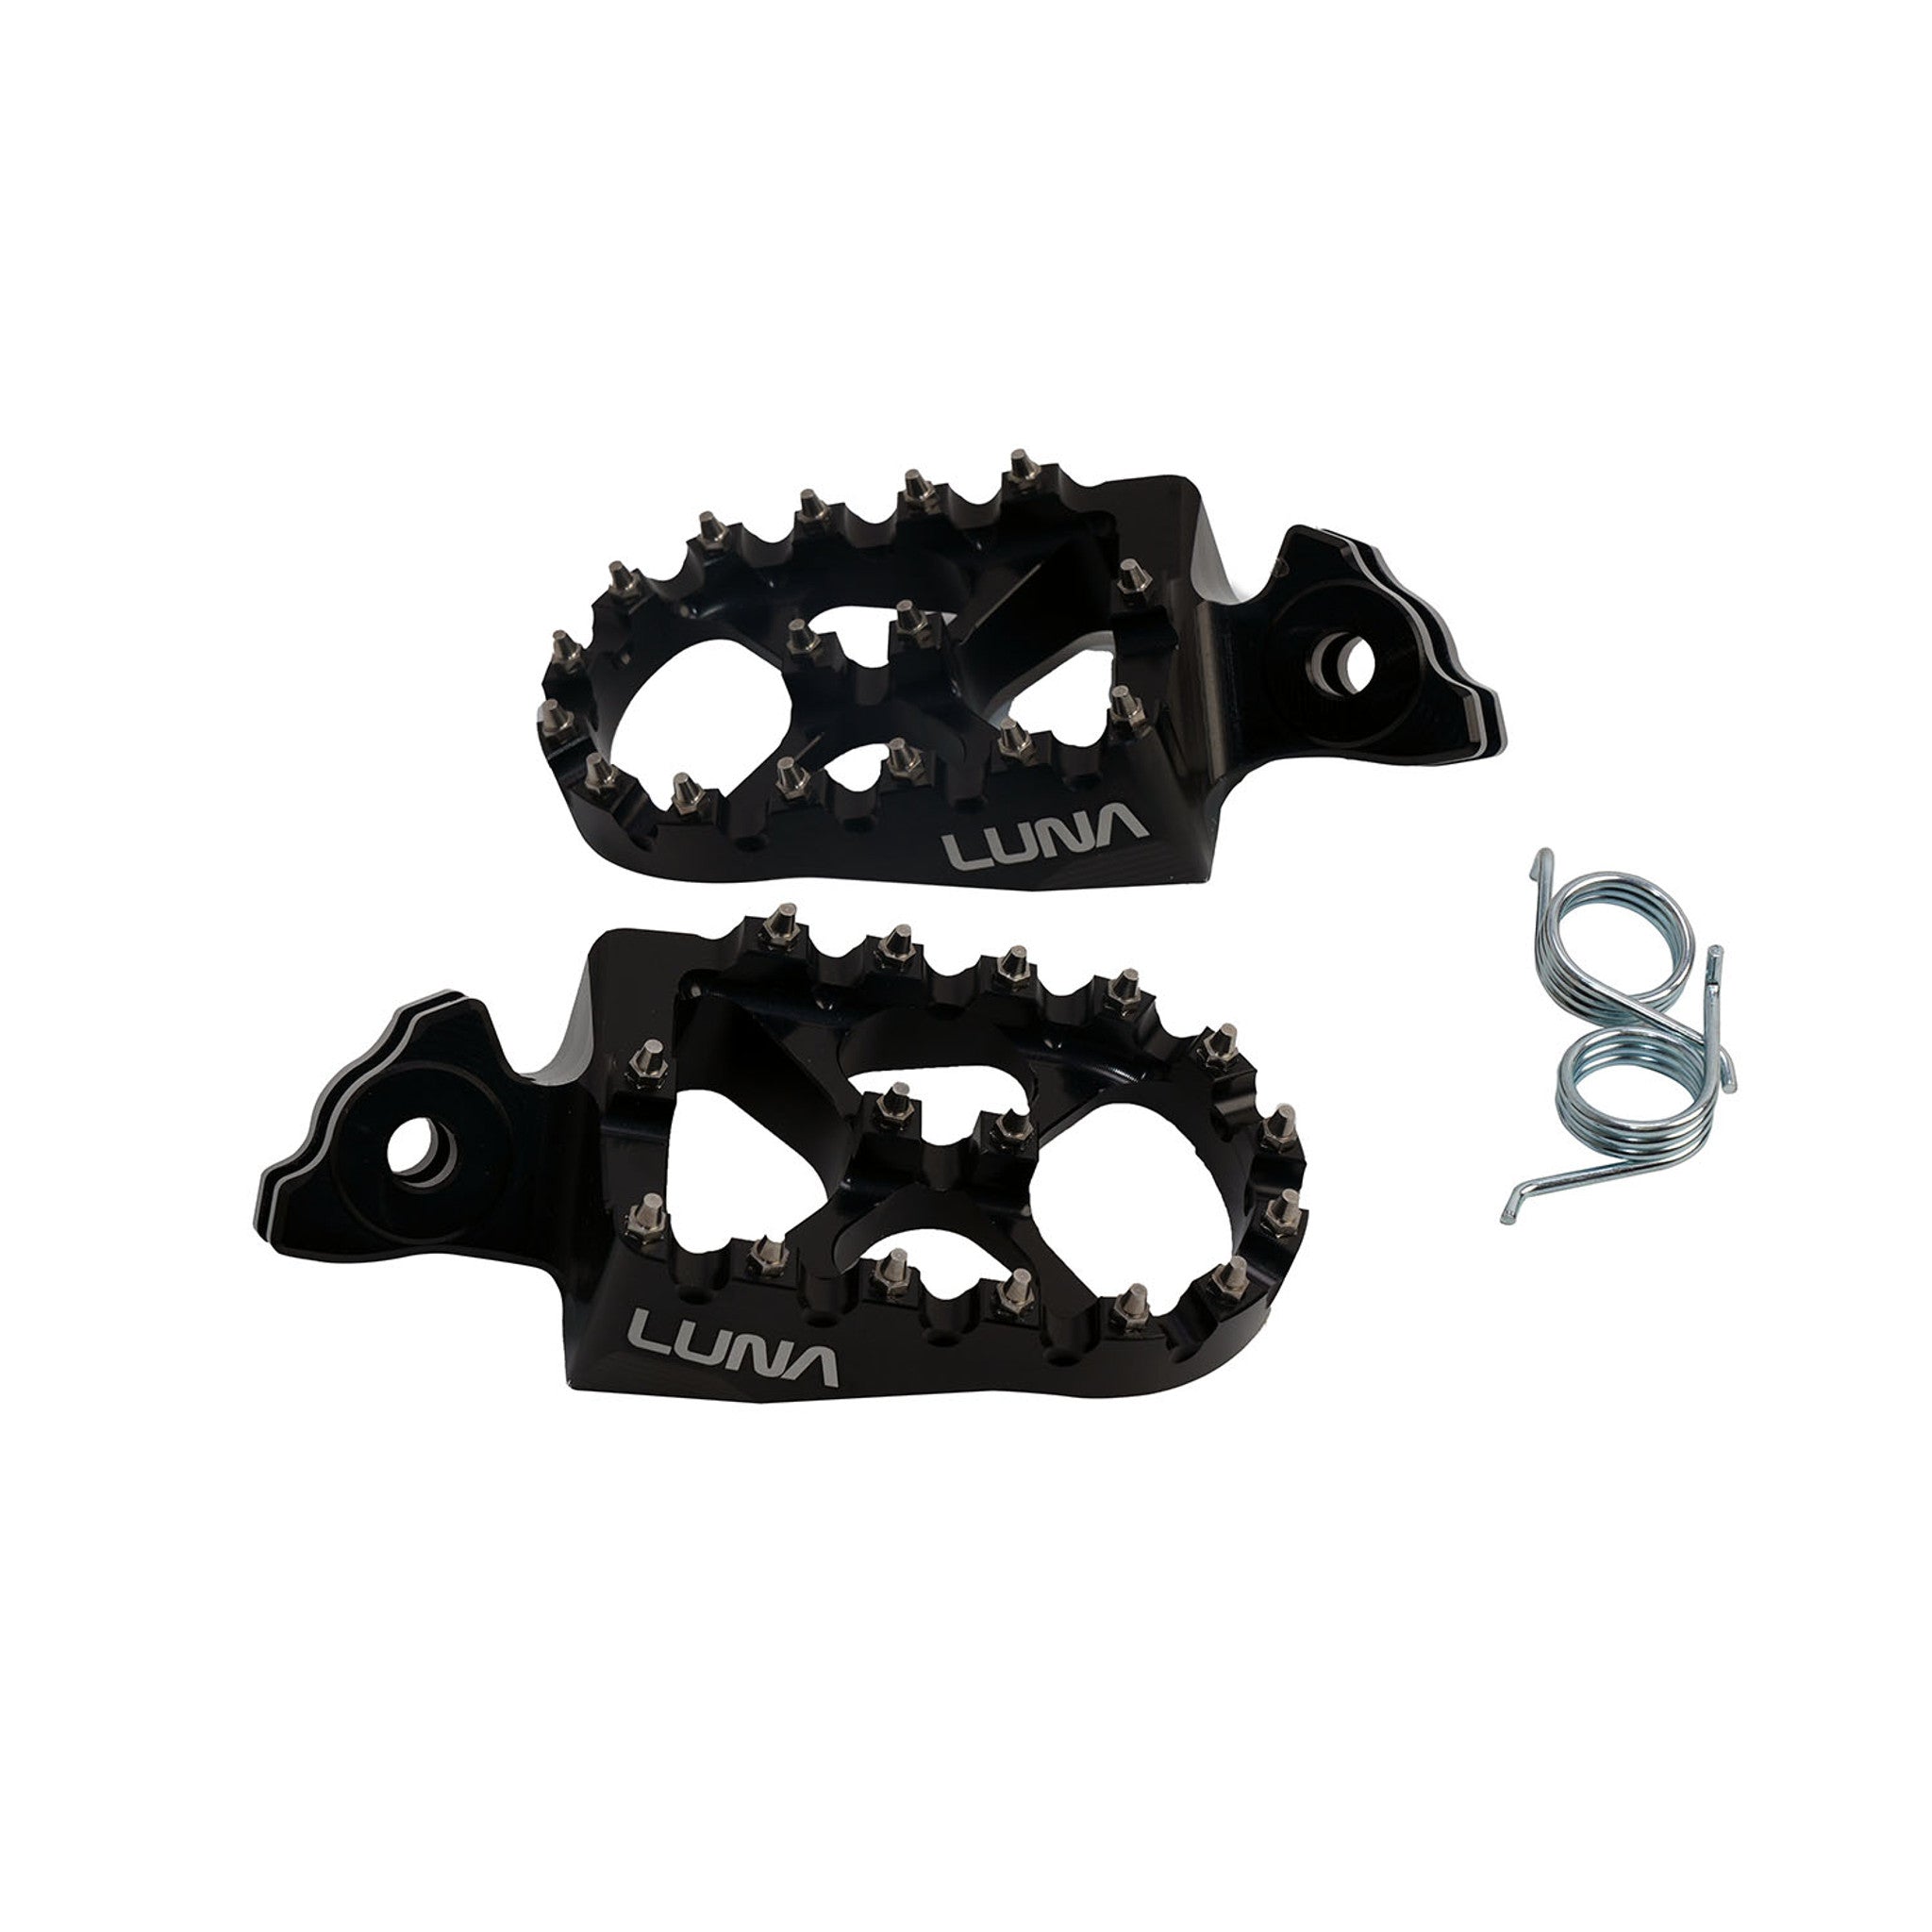 Luna Cycle upgraded Foot Pegs for Surron/ E-Ride Pro